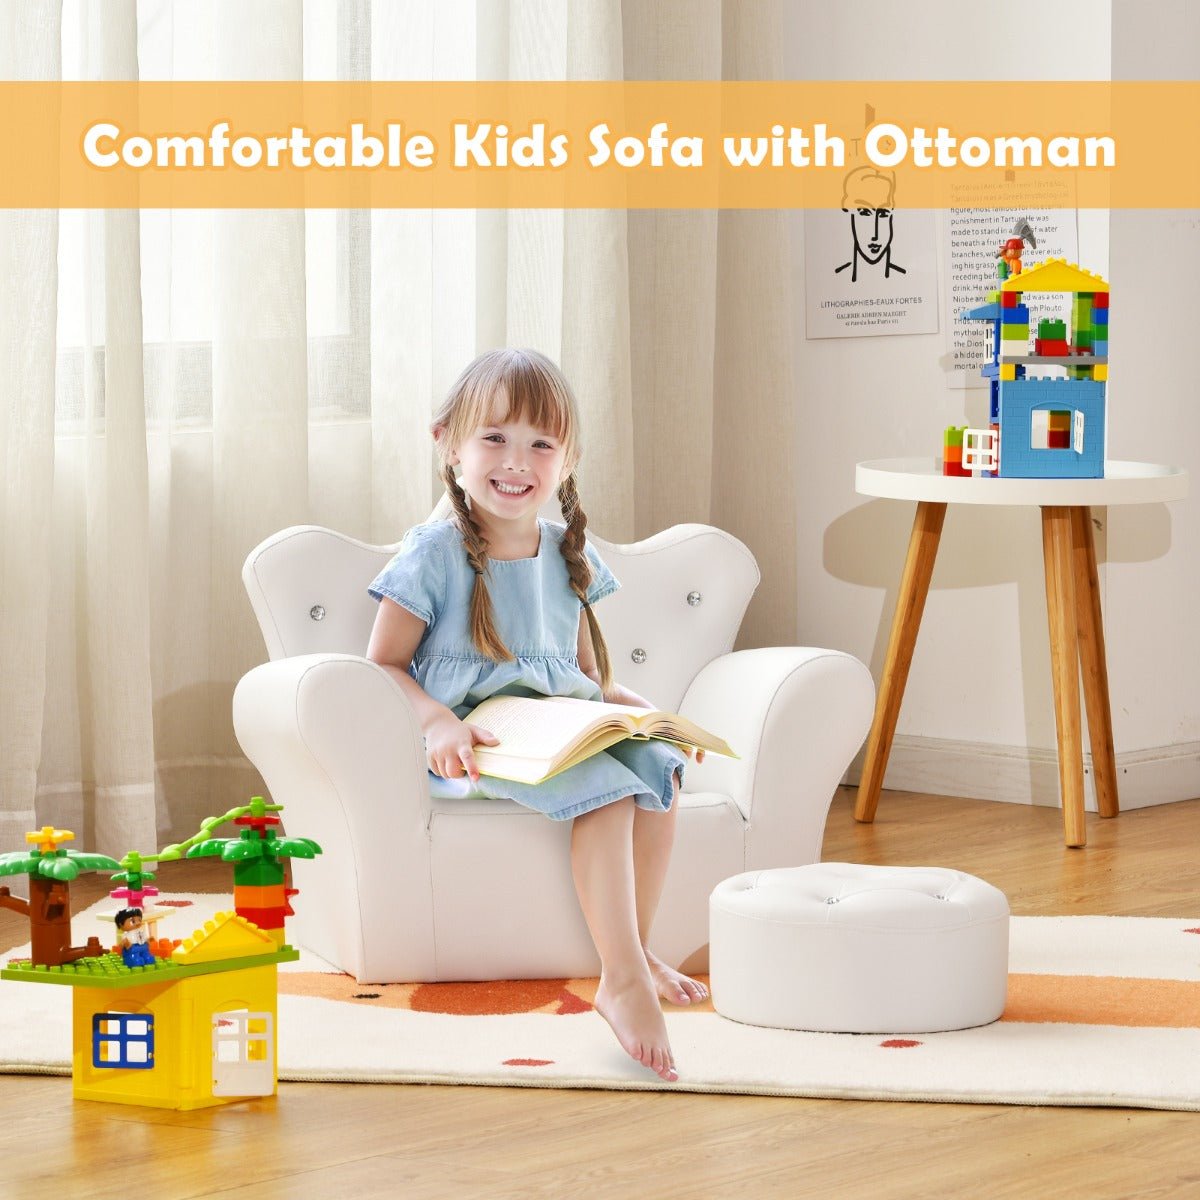 Get Crown-Shaped Backrest Kids Sofa: Throne-Inspired Seating for Toddlers